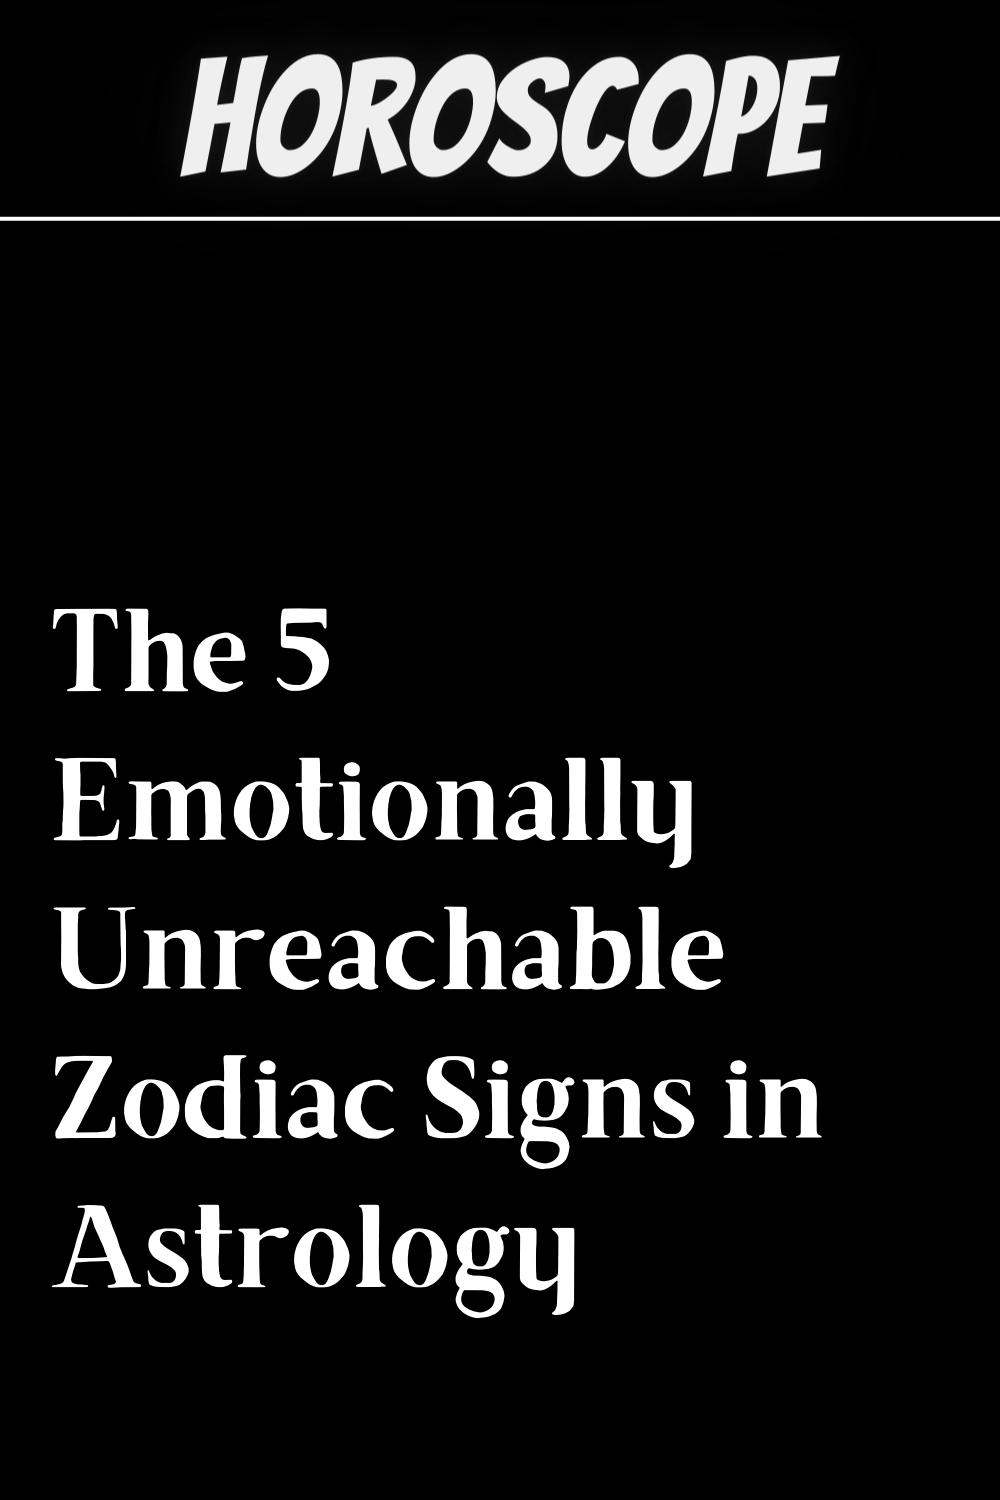 The 5 Emotionally Unreachable Zodiac Signs in Astrology